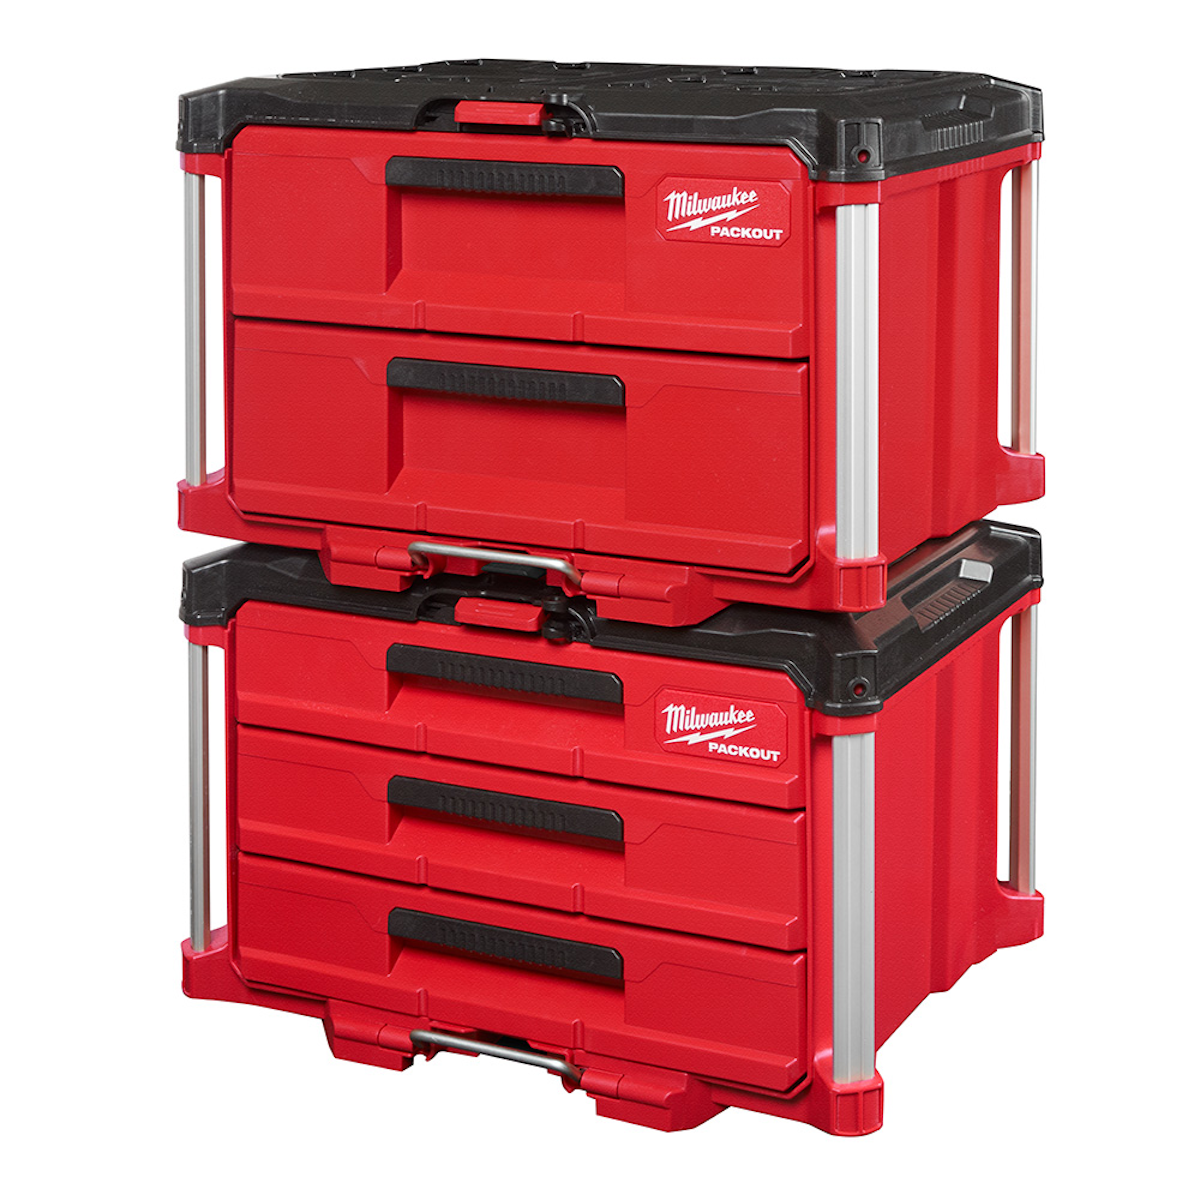 PACKOUT 2Drawer and 3Drawer Toolboxes From Milwaukee Tool Vehicle